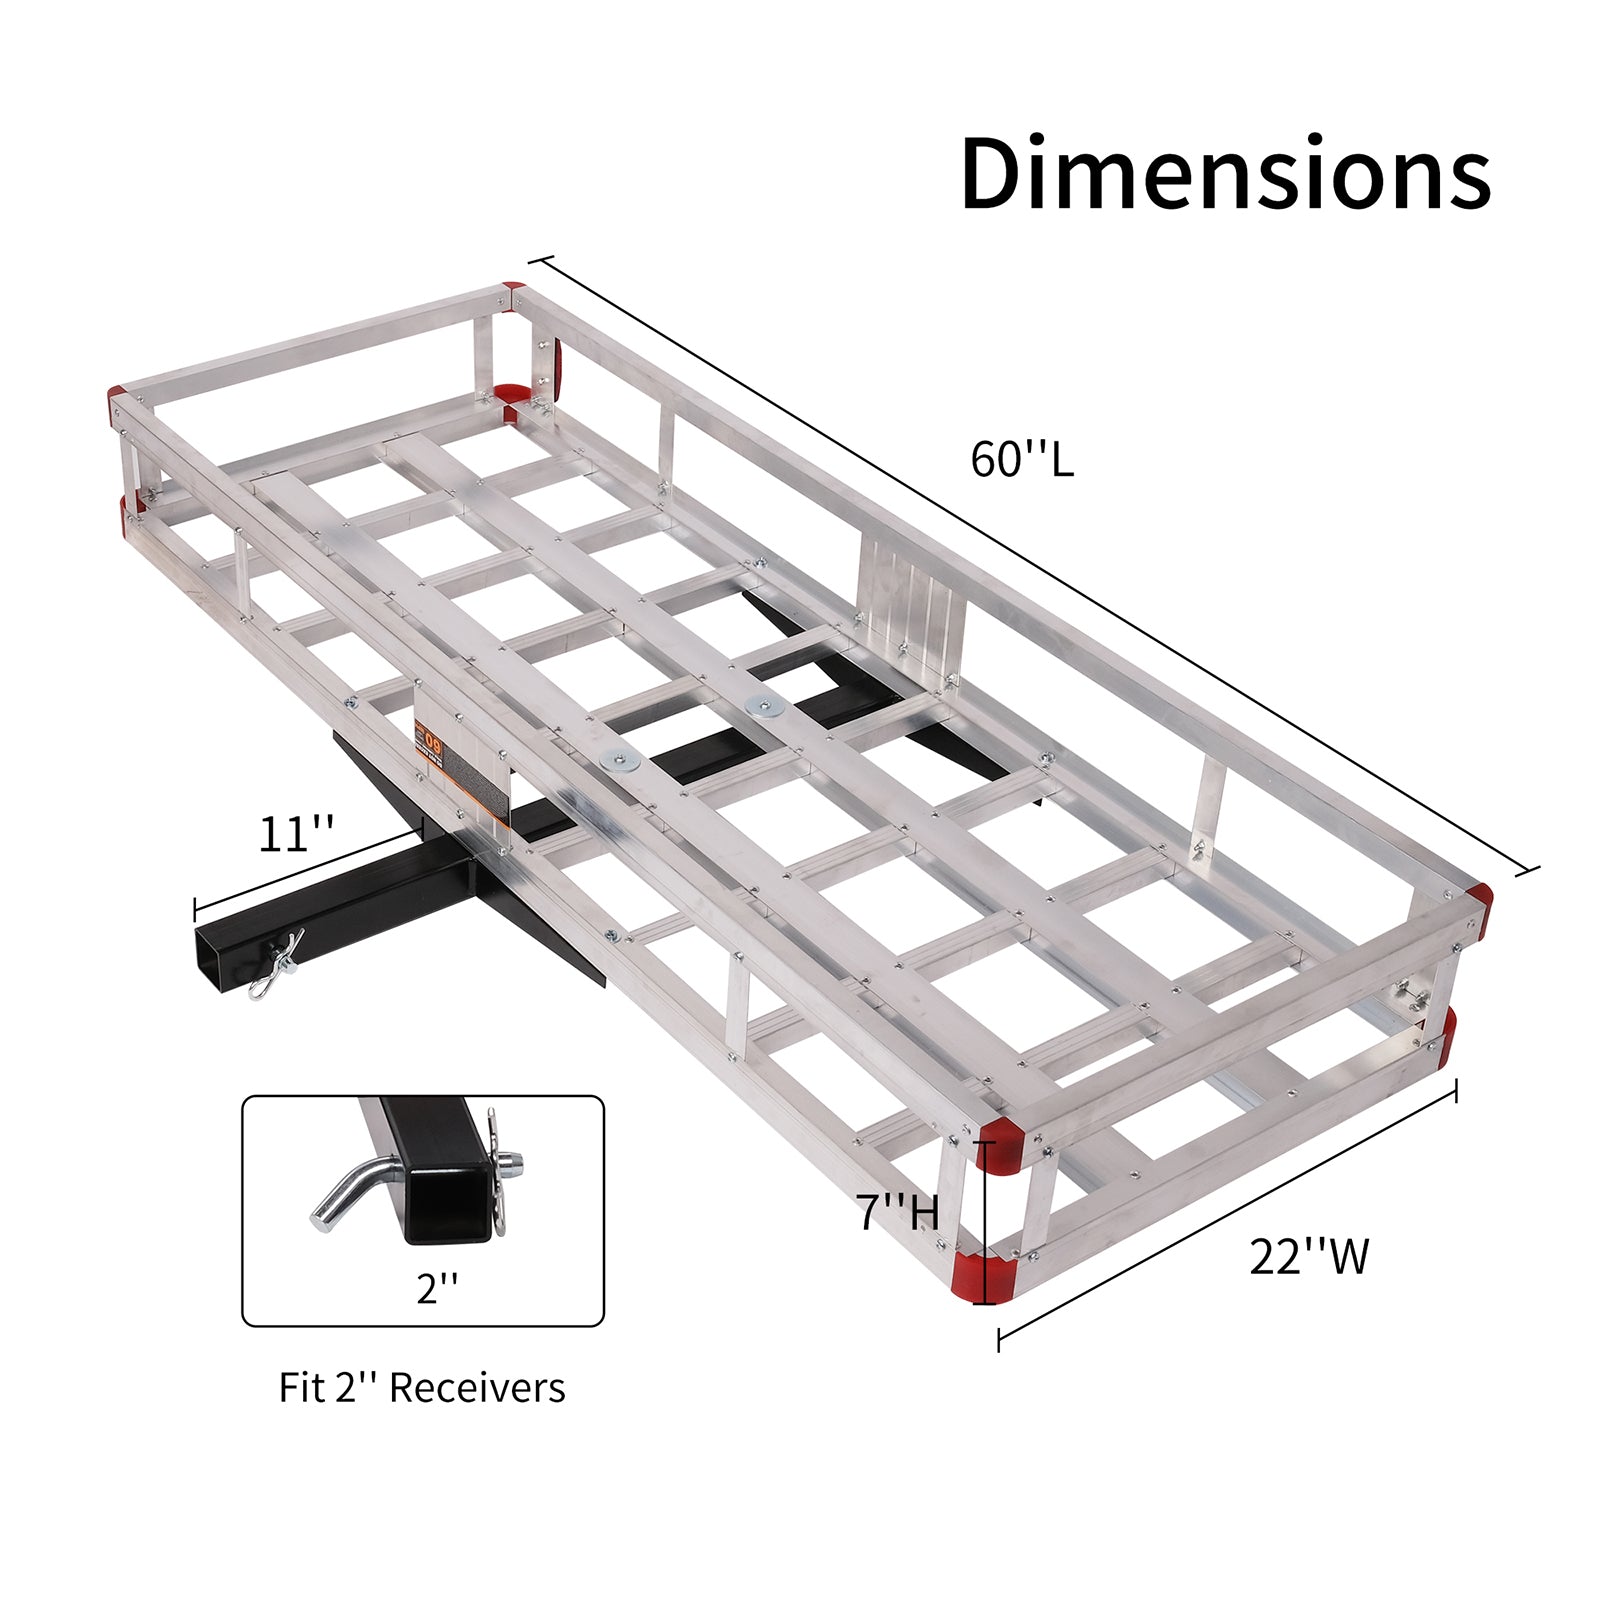 60"x 22"x 7" Hitch Mount Aluminum Cargo Carrier Basket Folding Cargo Rack with 2" Receiver, Silver